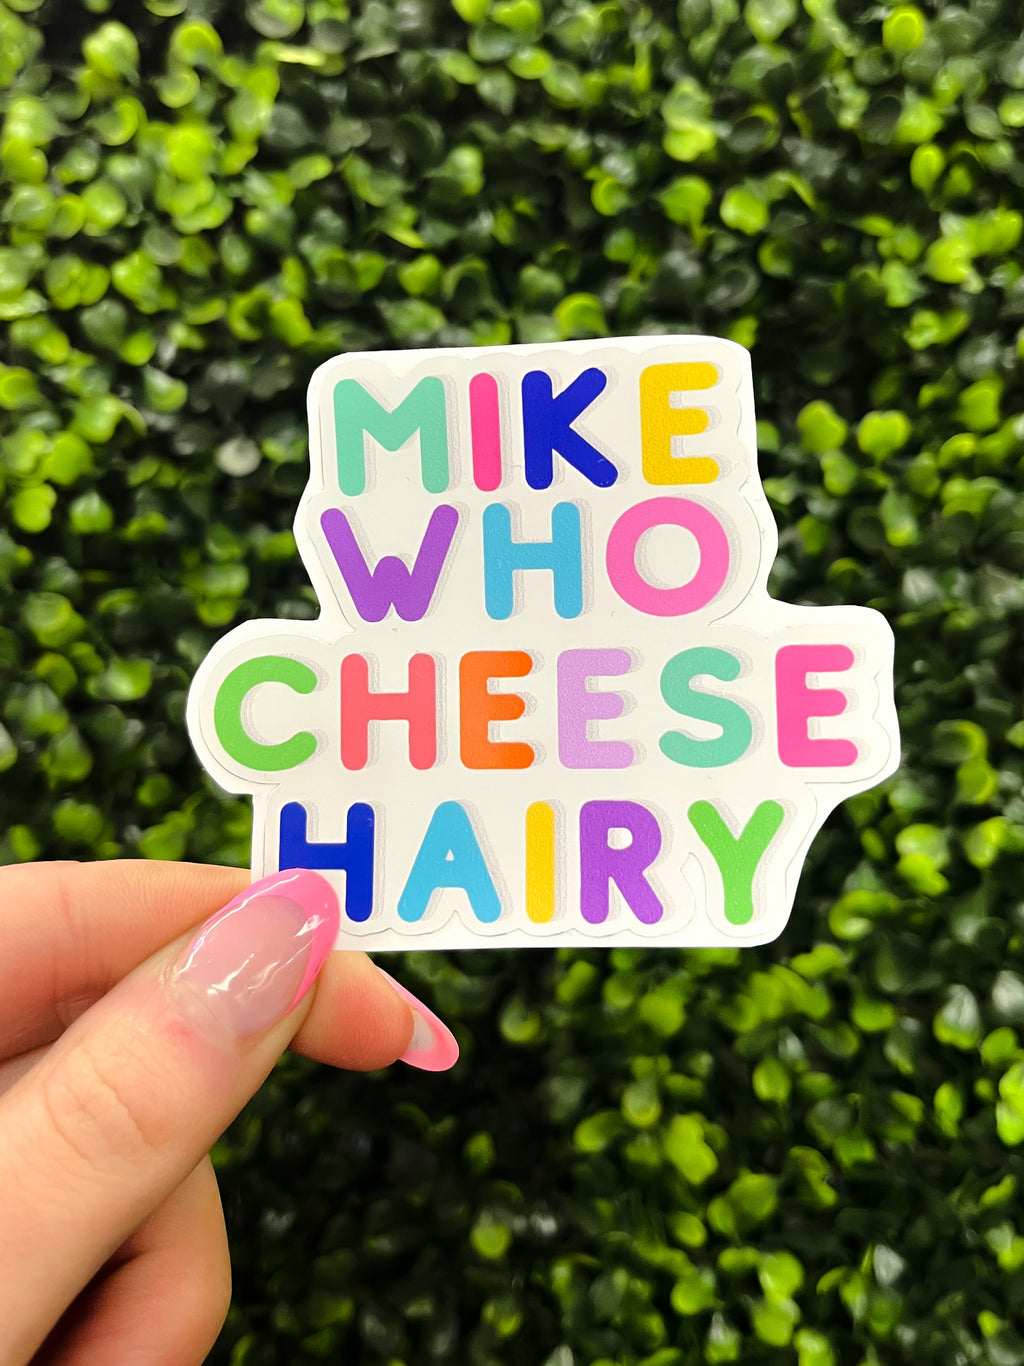 This Mike Who Cheese Hairy Sticker Decal is a must-have for anyone with a sense of humor. Made of durable laminate vinyl, it has vibrant colors and funny humor that will bring a smile to your face. With its waterproof and weatherproof design, you can stick it on a water bottle, computer, or anywhere else you want. 